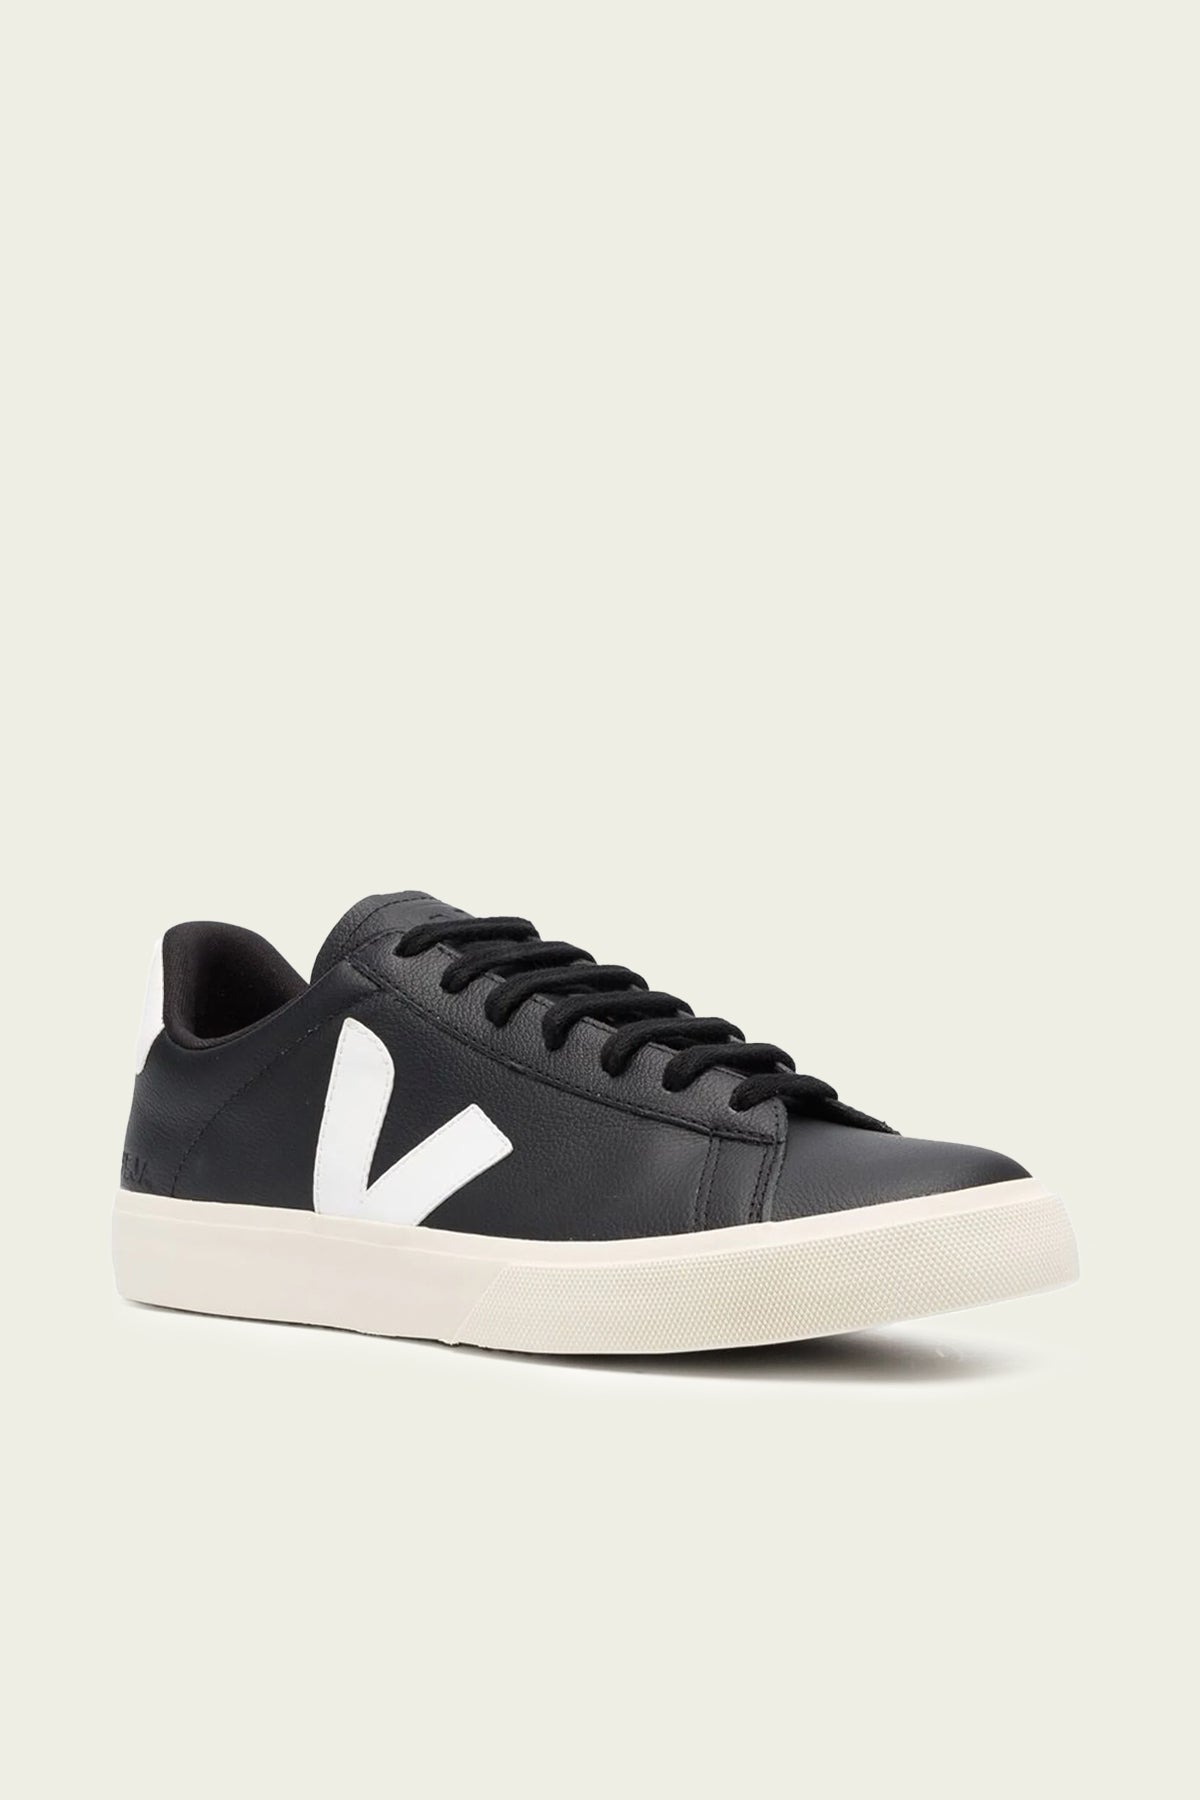 Campo Chromefree Leather Men Sneaker in Black and White - shop-olivia.com